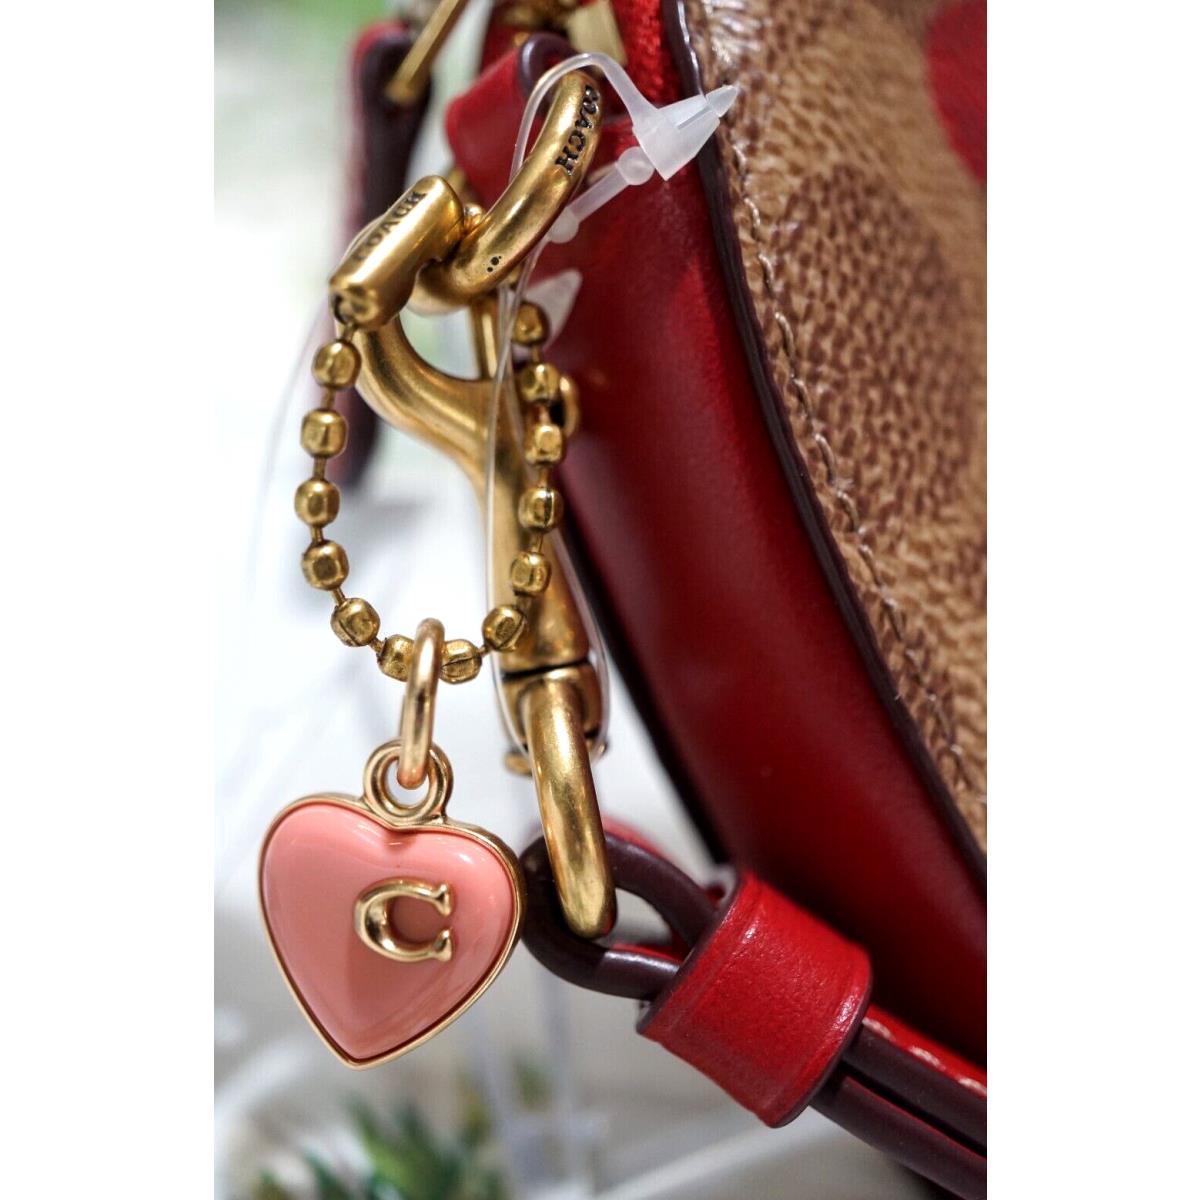 Coach Signature Coated Canvas W/heart Print Coin Purse Wristlet In Tan Red, - Coach bag - Red Apple Handle/Strap, Gold Hardware, Tan Red Apple  Exterior